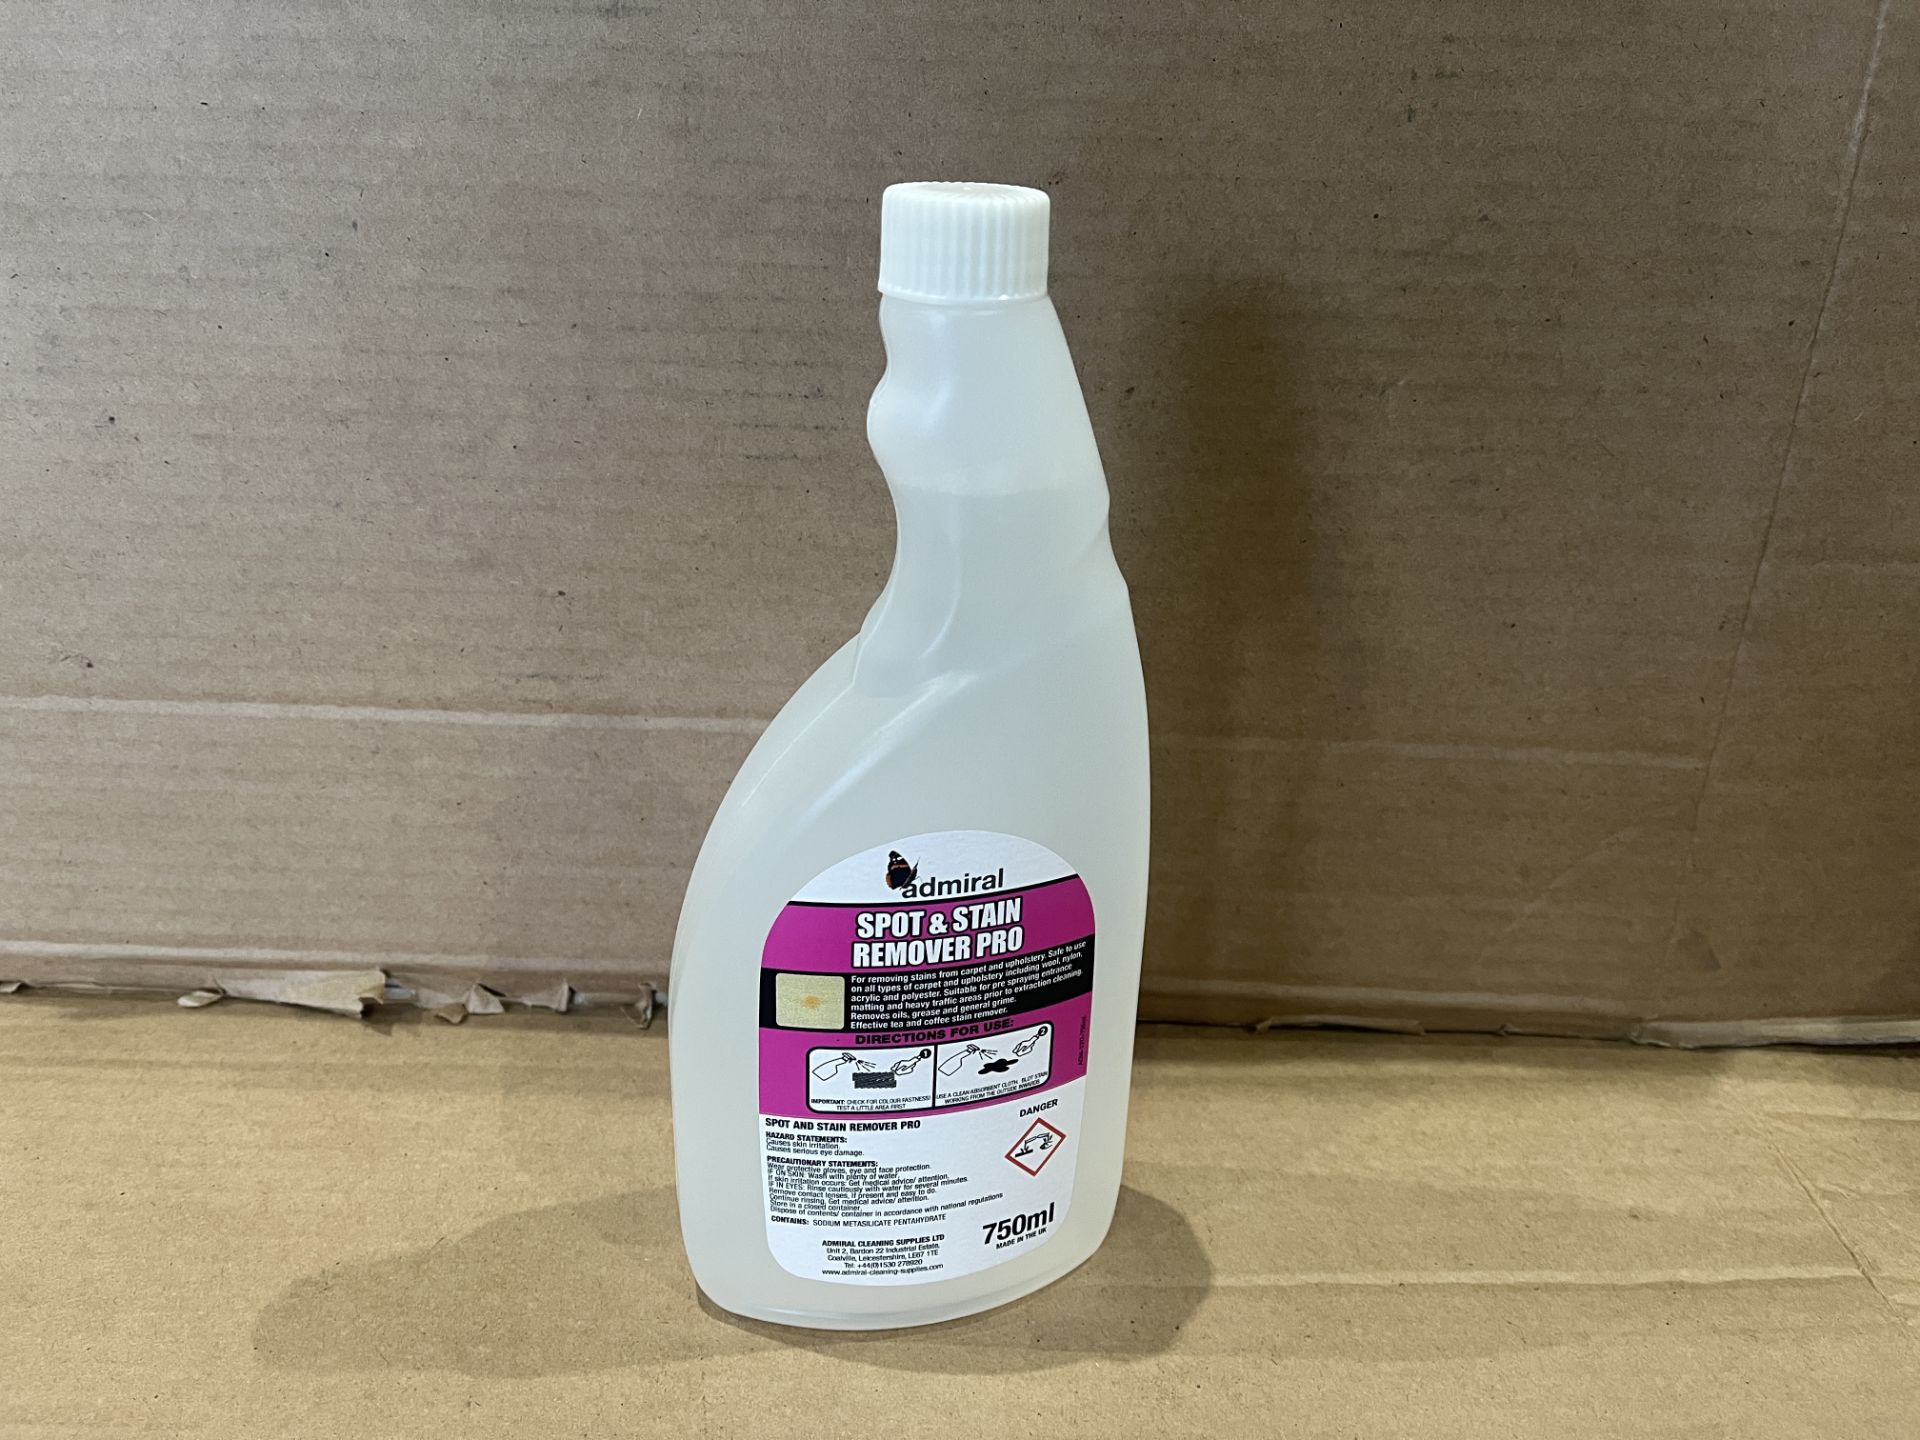 72 X BRAND NEW ADMIRAL PROFESSIONAL 750ML SPOT AND STAIN REMOVER PRO R16-10